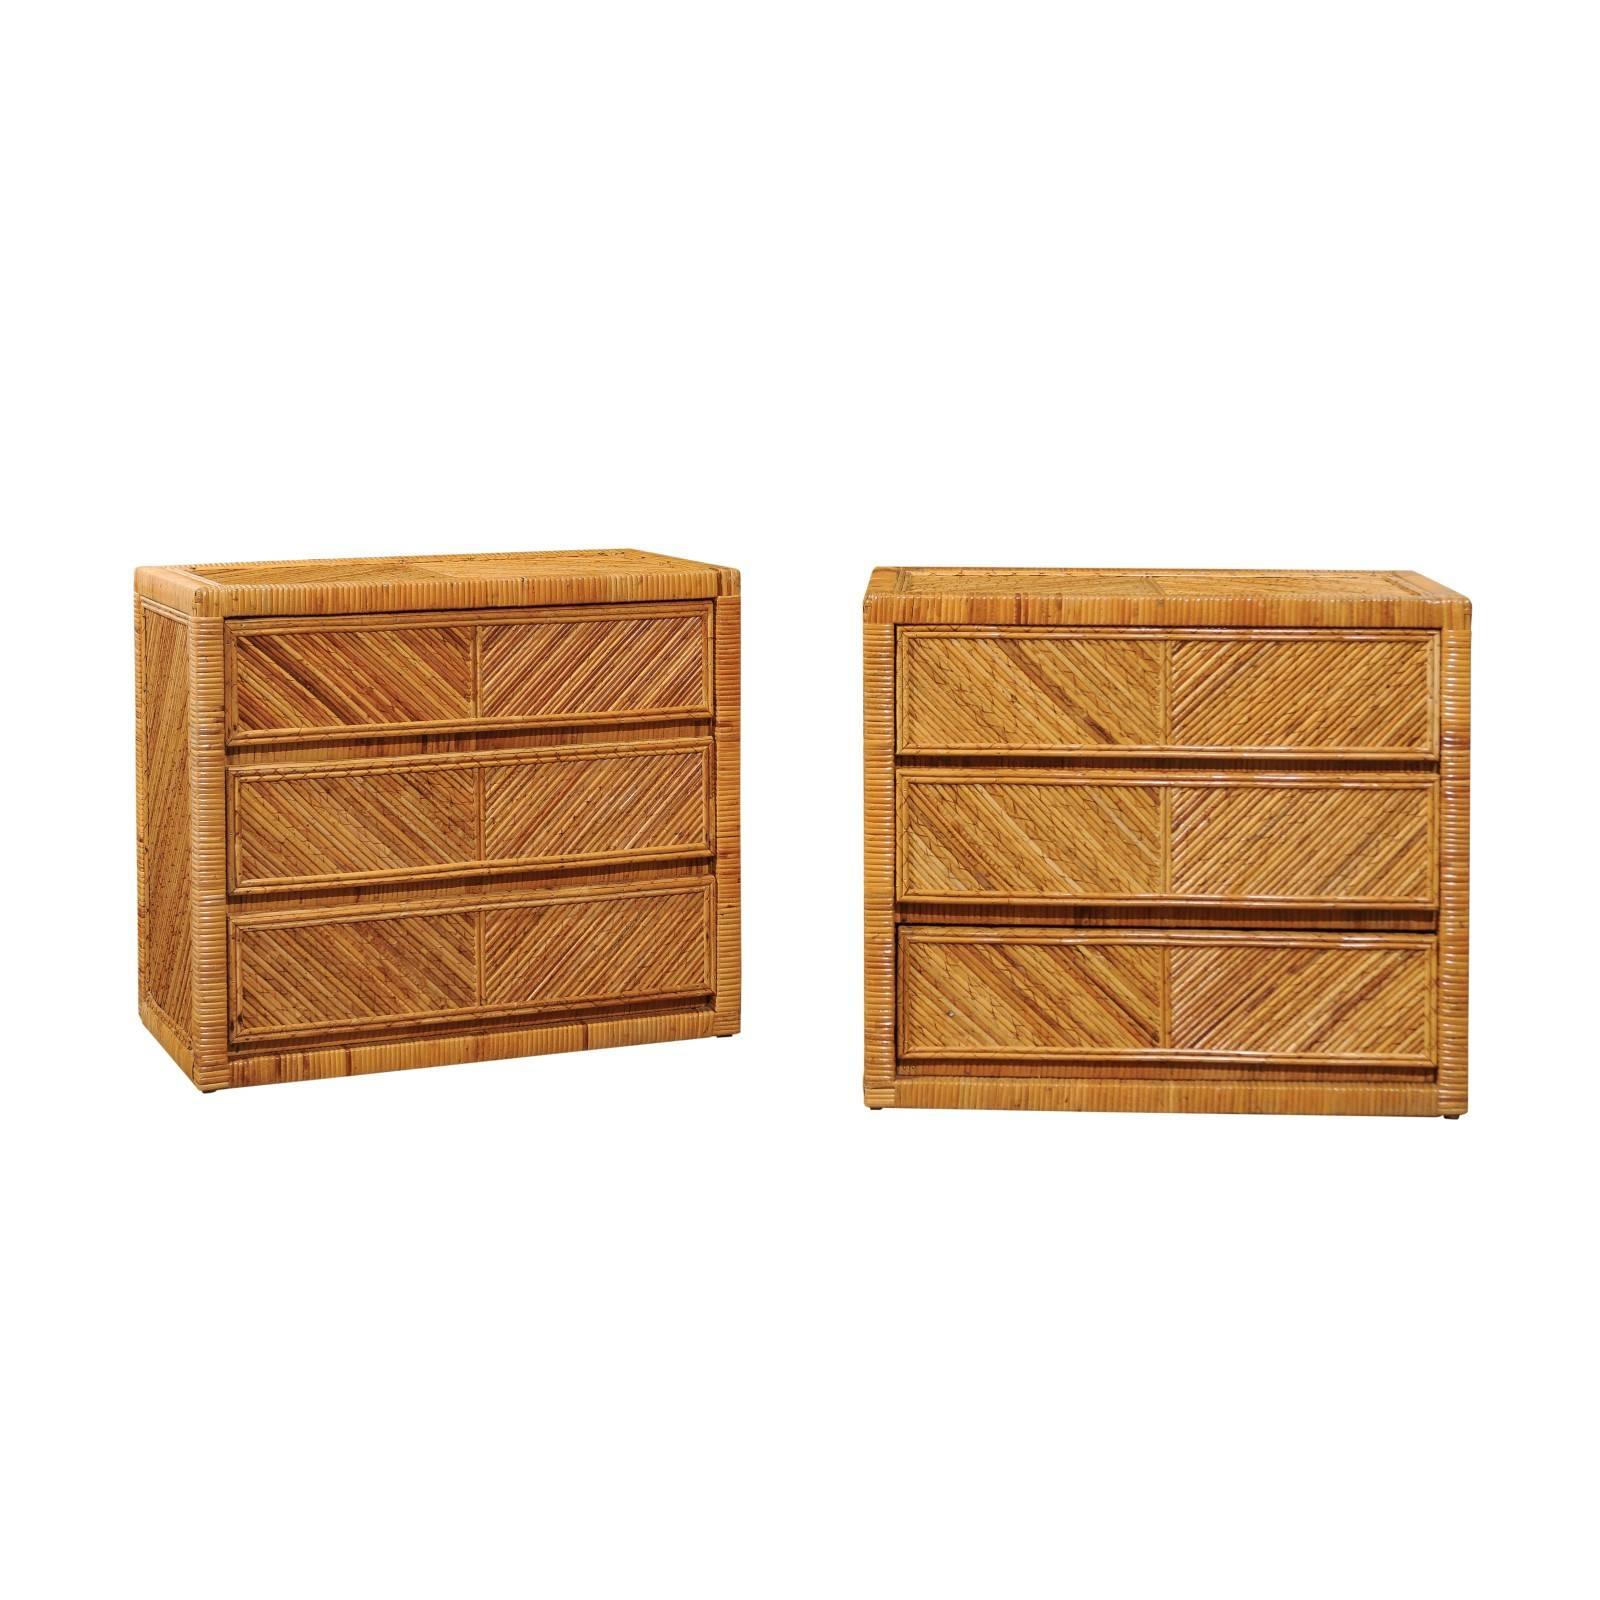 Incredible Pair of Restored Vintage Cane and Reed Bamboo Small Chests